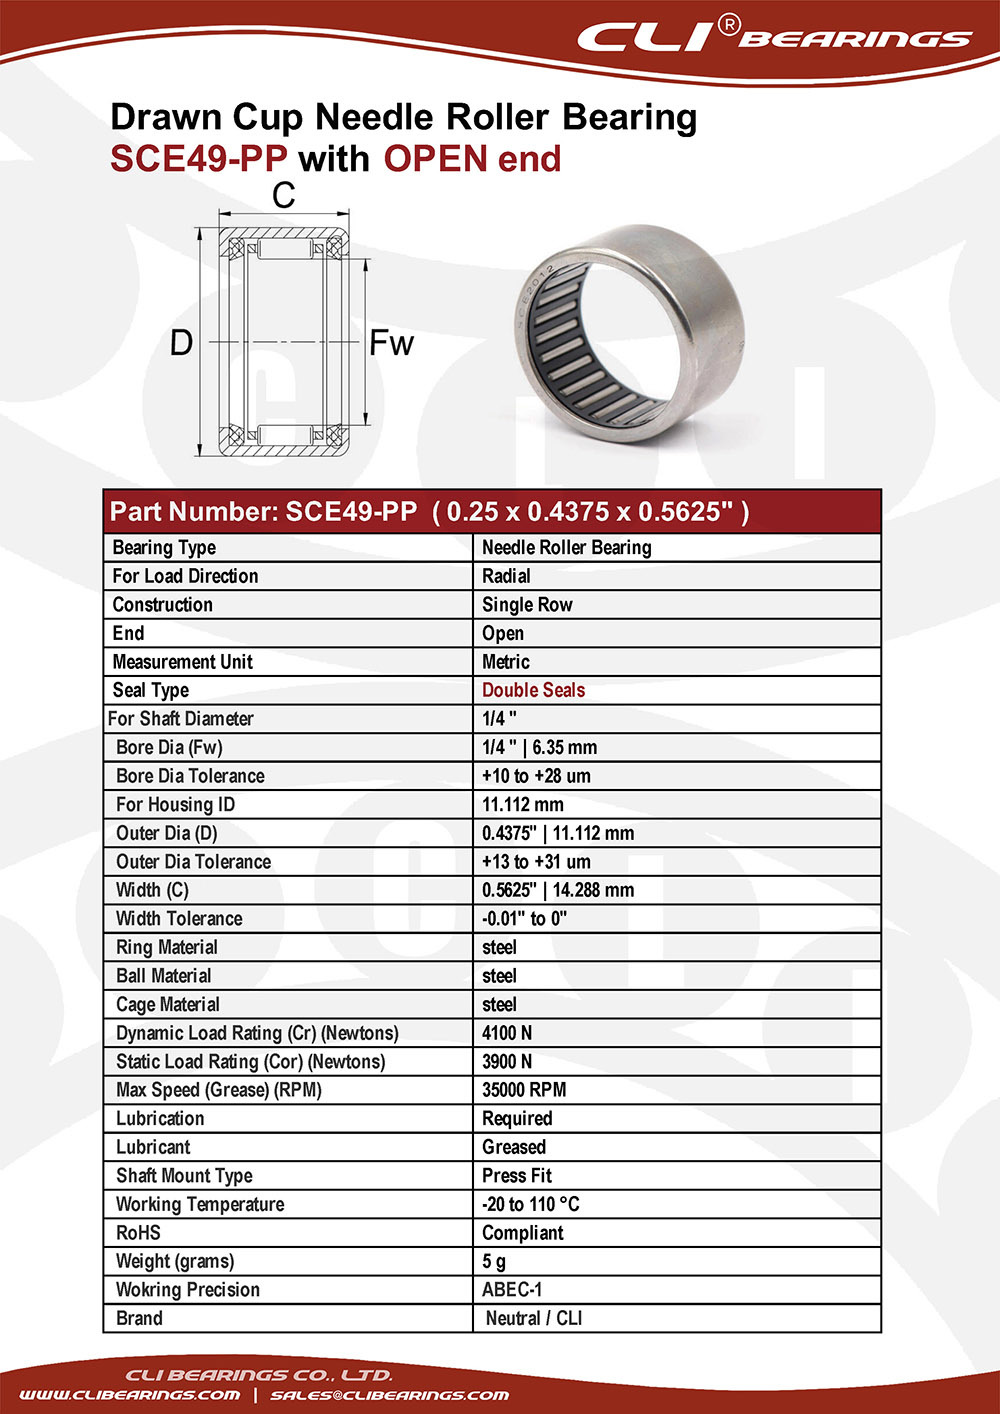 Original sce49 pp 0 25x0 4375x0 5625 drawn cup needle roller bearings with double seals   cli bearings co ltd nw